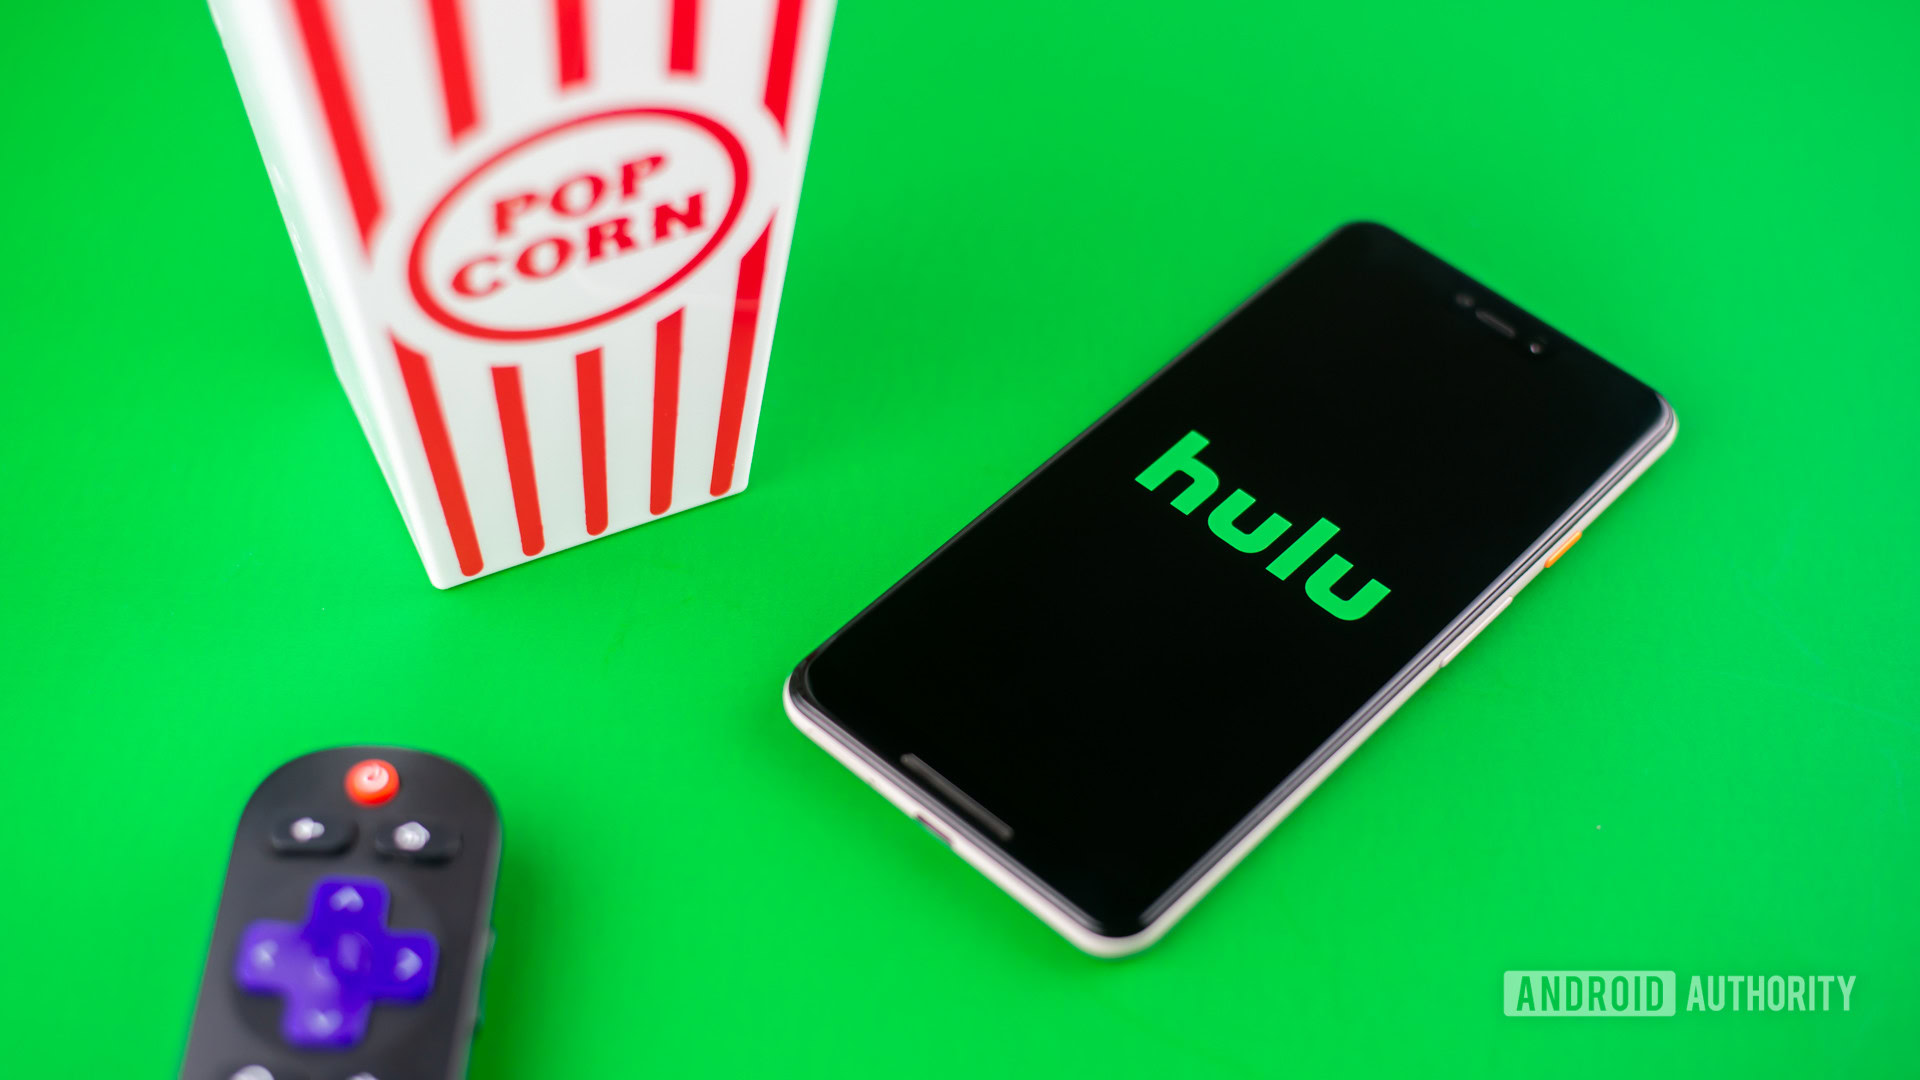 Hulu live TV features and options Everything you need to know